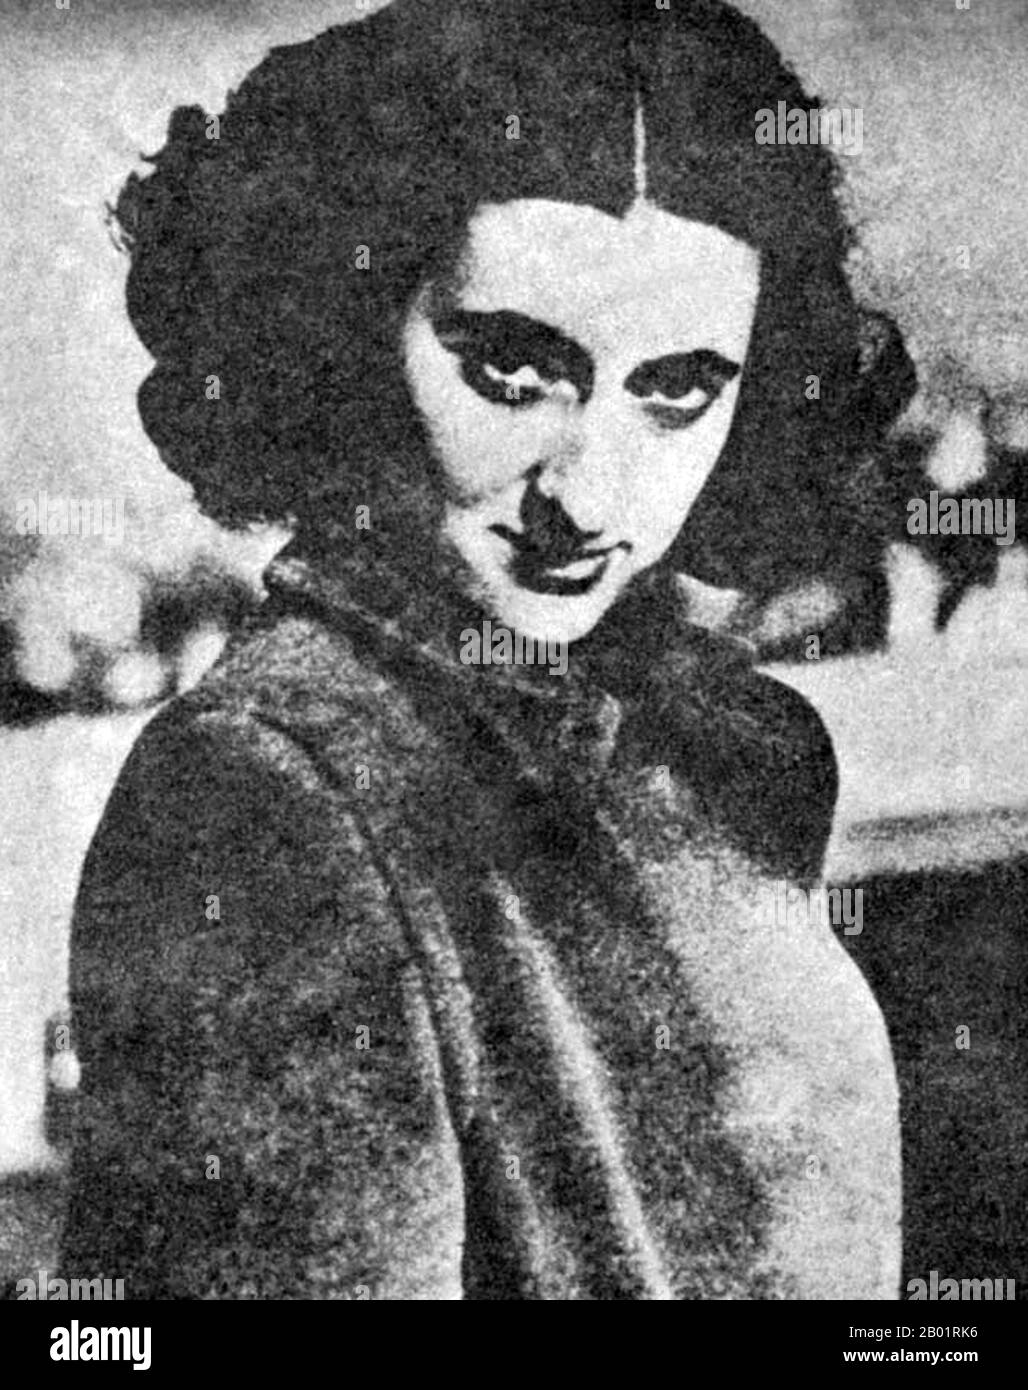 India: A young Indira Gandhi (19 November 1917 - 31 October 1984), subsequently Prime Minister of India for four consecutive terms (r. 1966-1984), late 1930s.  Indira Priyadarshini Gandhi was the Prime Minister of the Republic of India for three consecutive terms from 1966 to 1977 and for a fourth term from 1980 until her assassination in 1984, a total of fifteen years. She is India's only female prime minister to date and a central figure in India's post-colonial politics. She is the world's all time longest serving female Prime Minister. Stock Photo